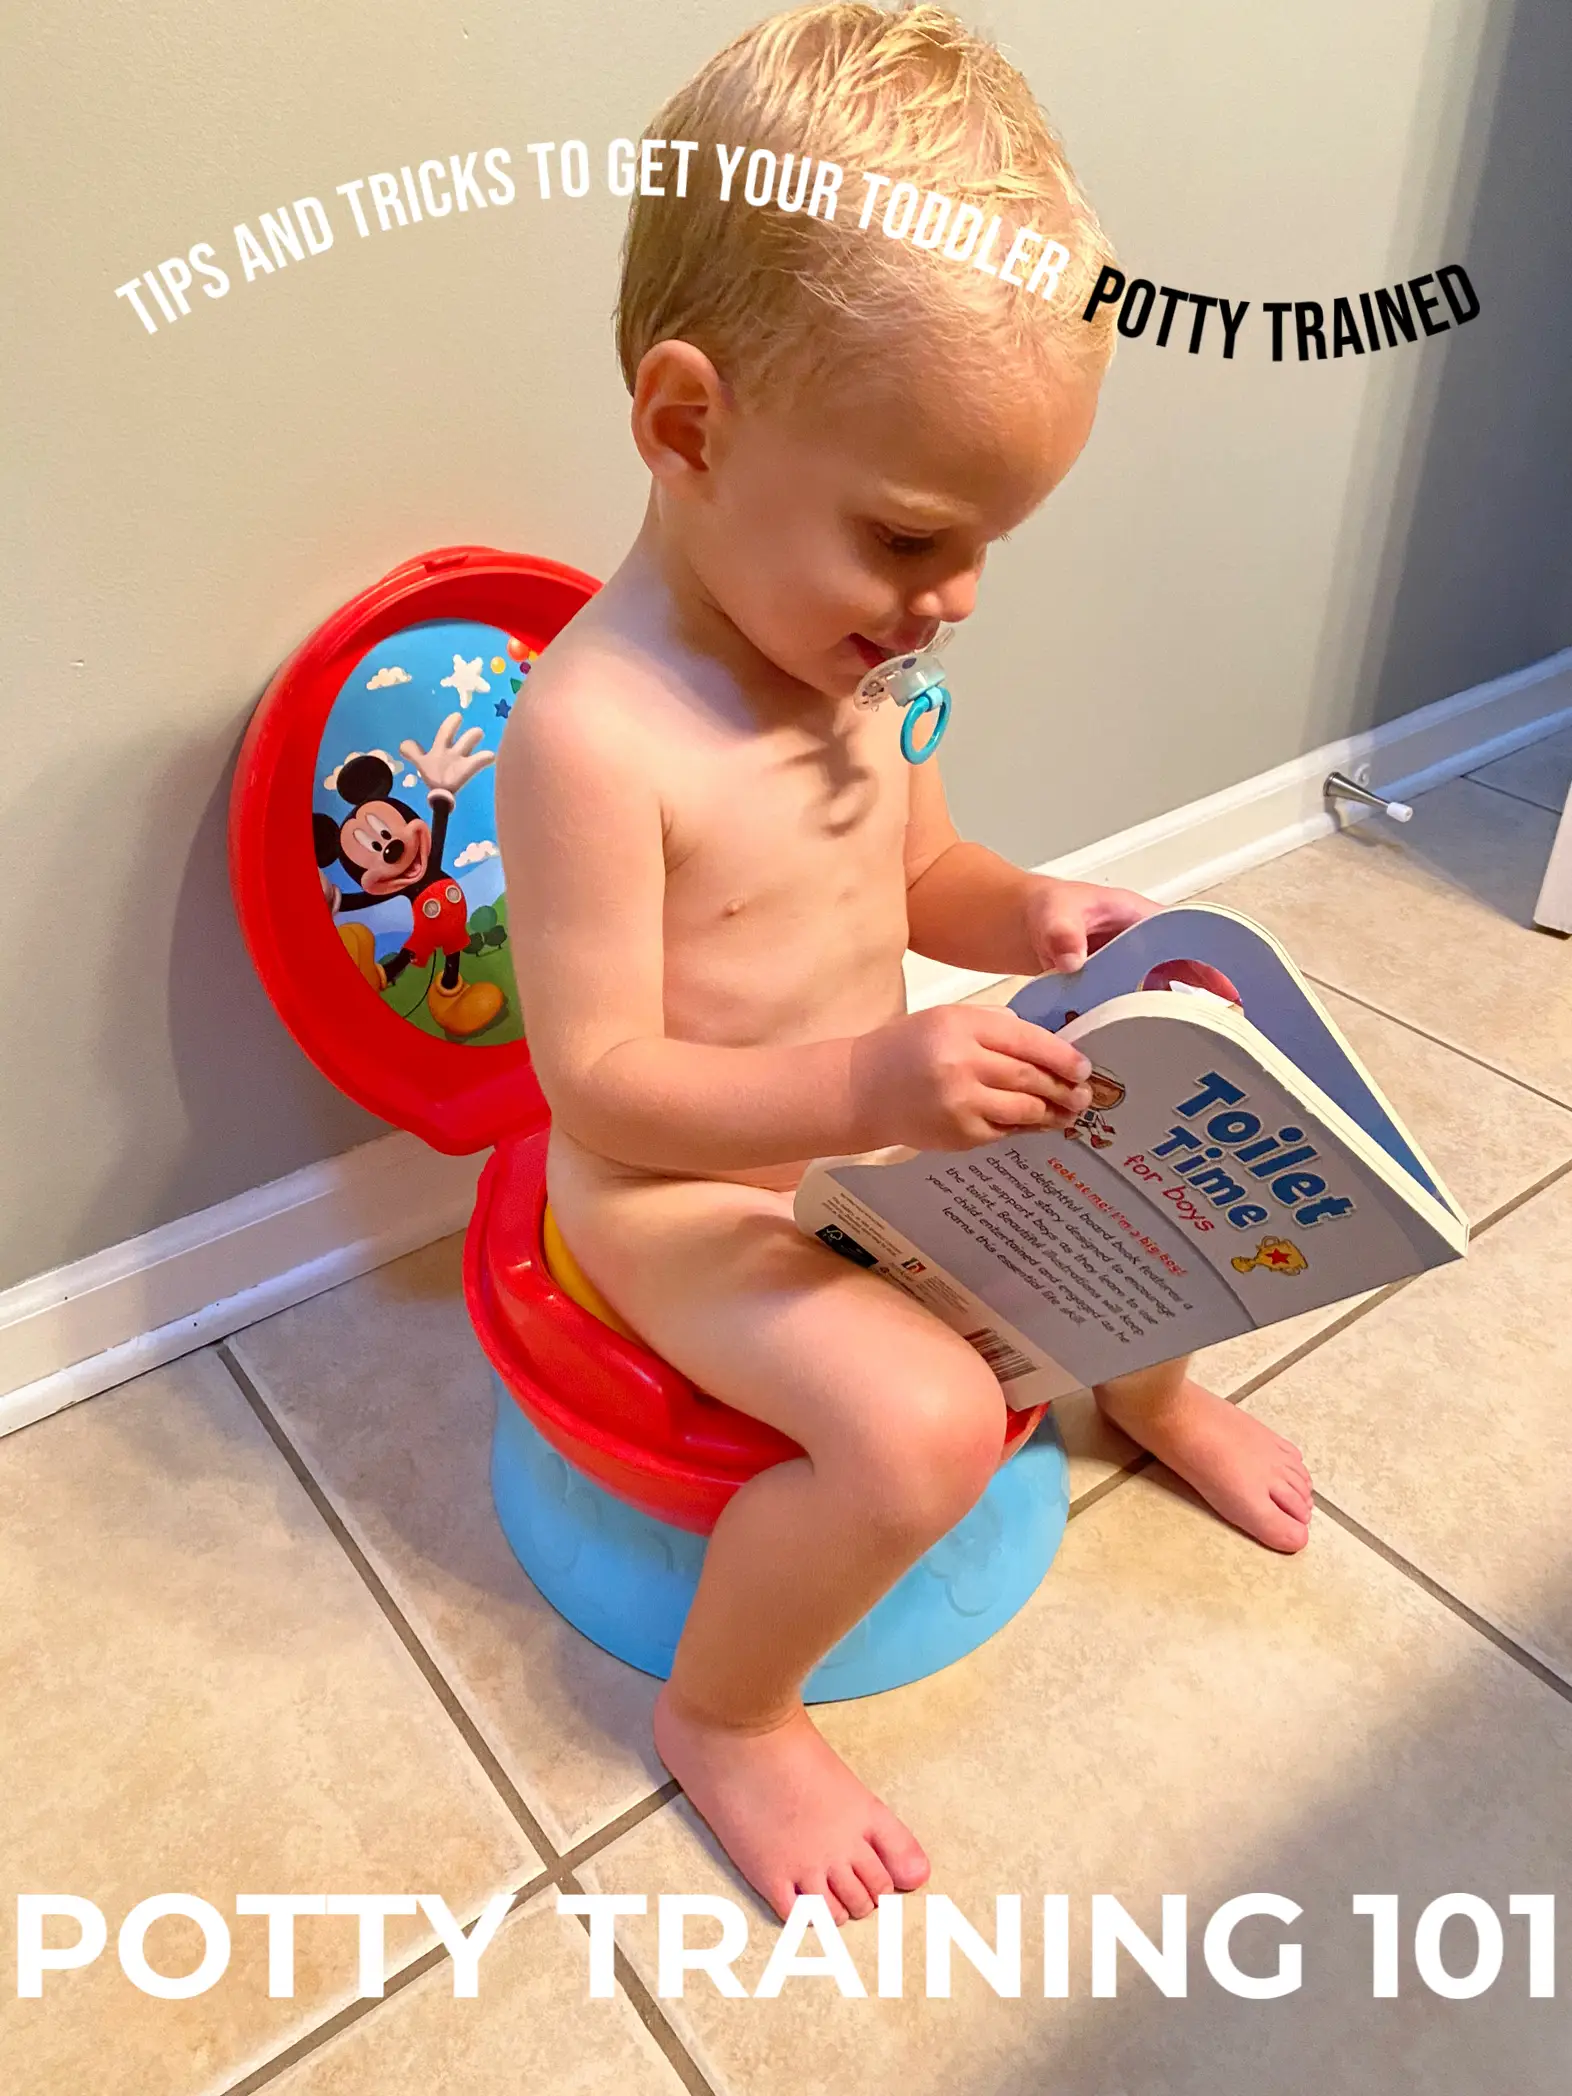 baby meets city: Dear Potty Training: You're the Most Un-fun Thing Ever